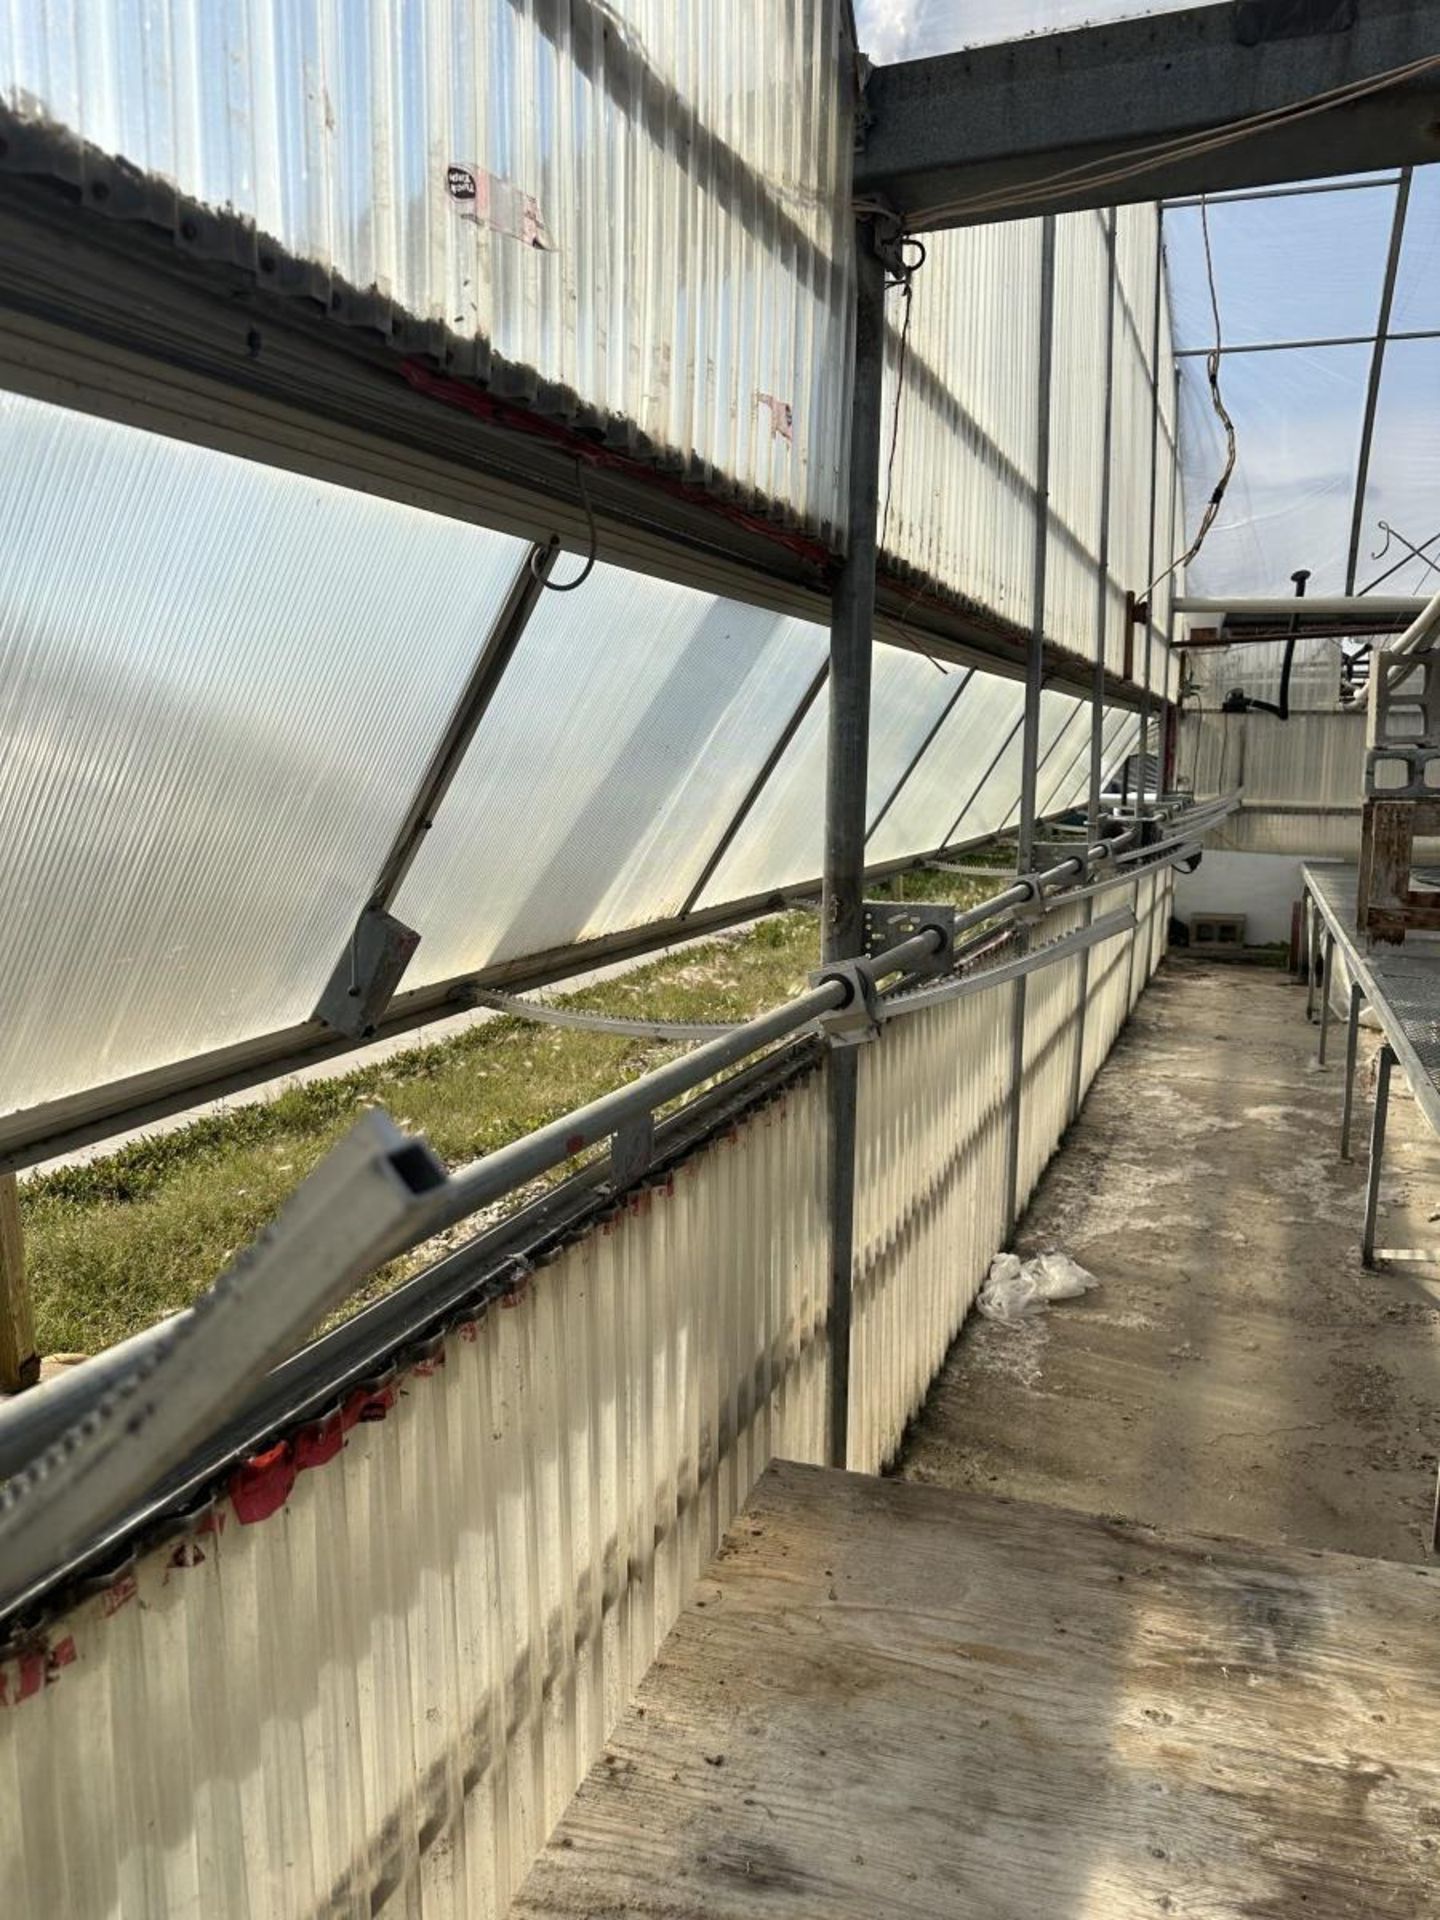 WESTBROOK GUTTER CONNECT 2-BAY GREENHOUSE 60FT X 144FT X 96” H & 2-BAY 60FT X 72 FT X 96”, INCLUDING - Image 65 of 95